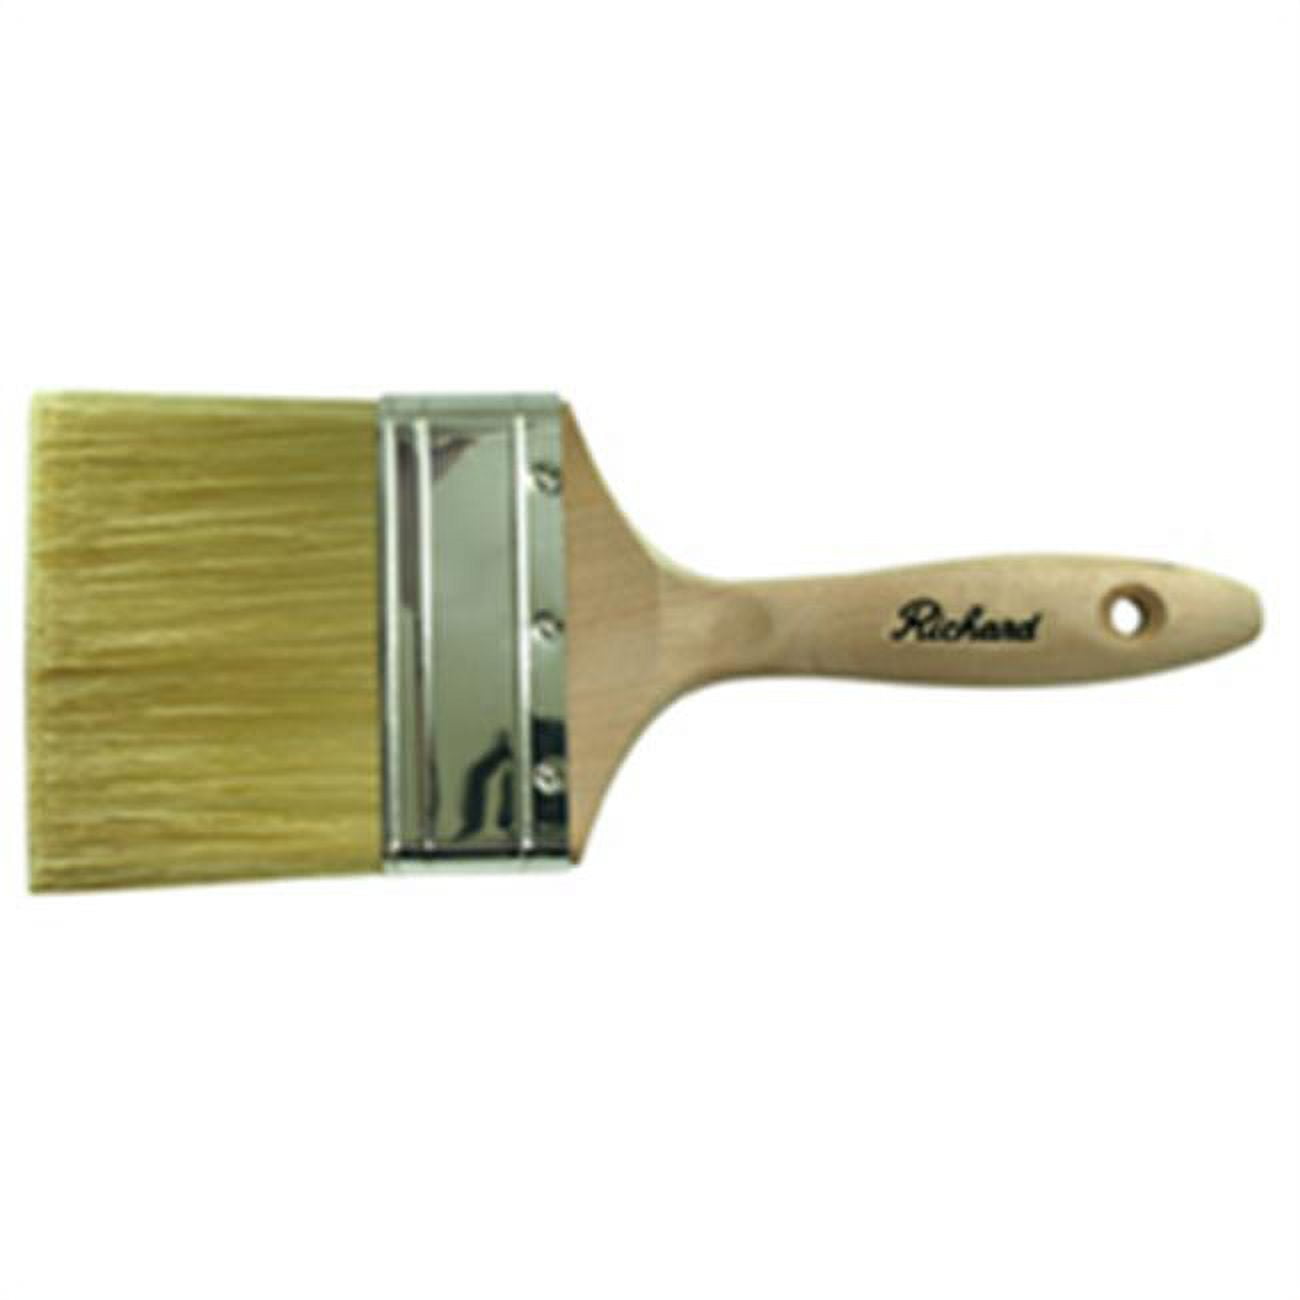 Cabot Stains 140.0000061.000 4 Wood Stain Brush - 1 Each